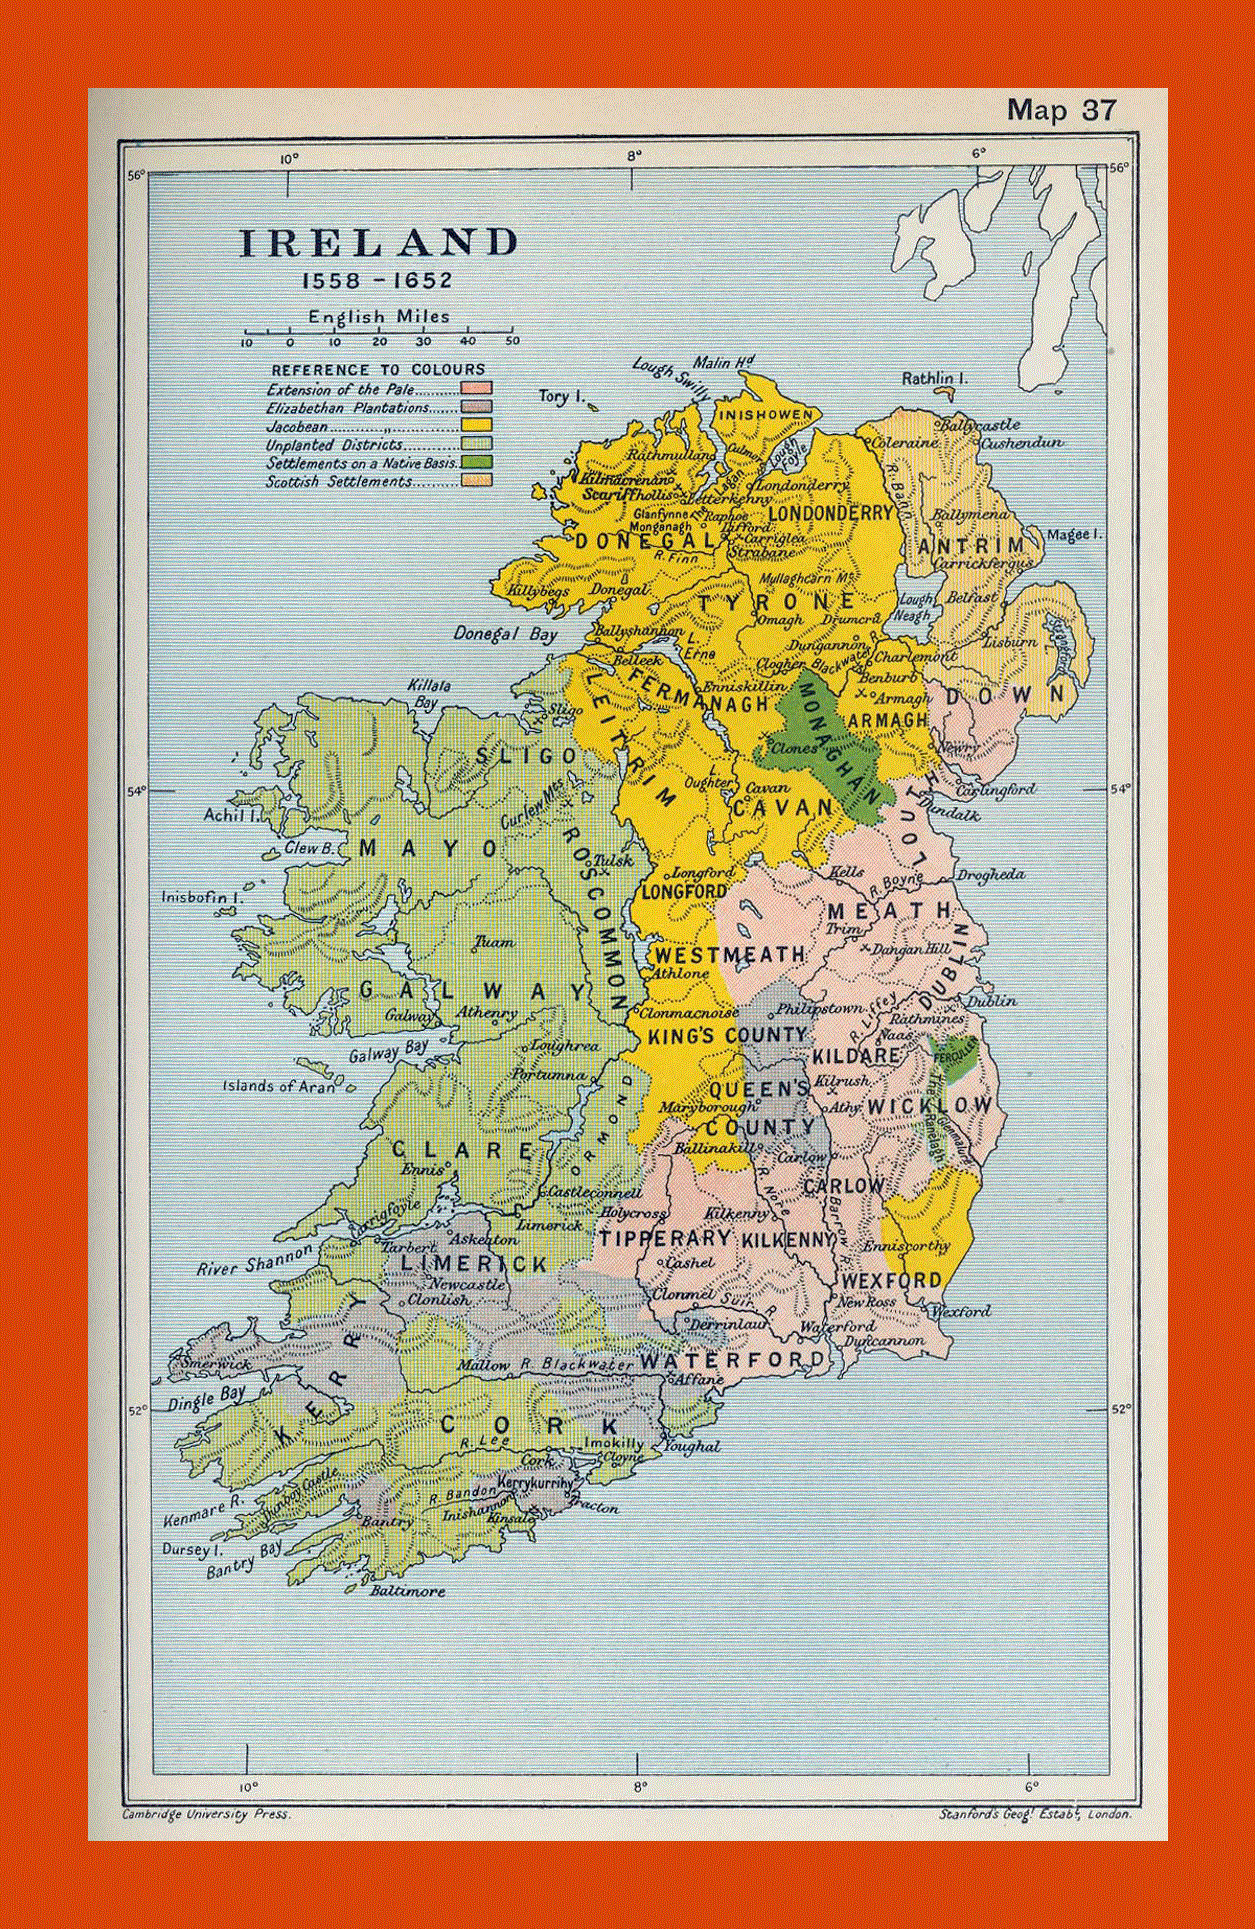 Old map of Ireland - 1558-1652